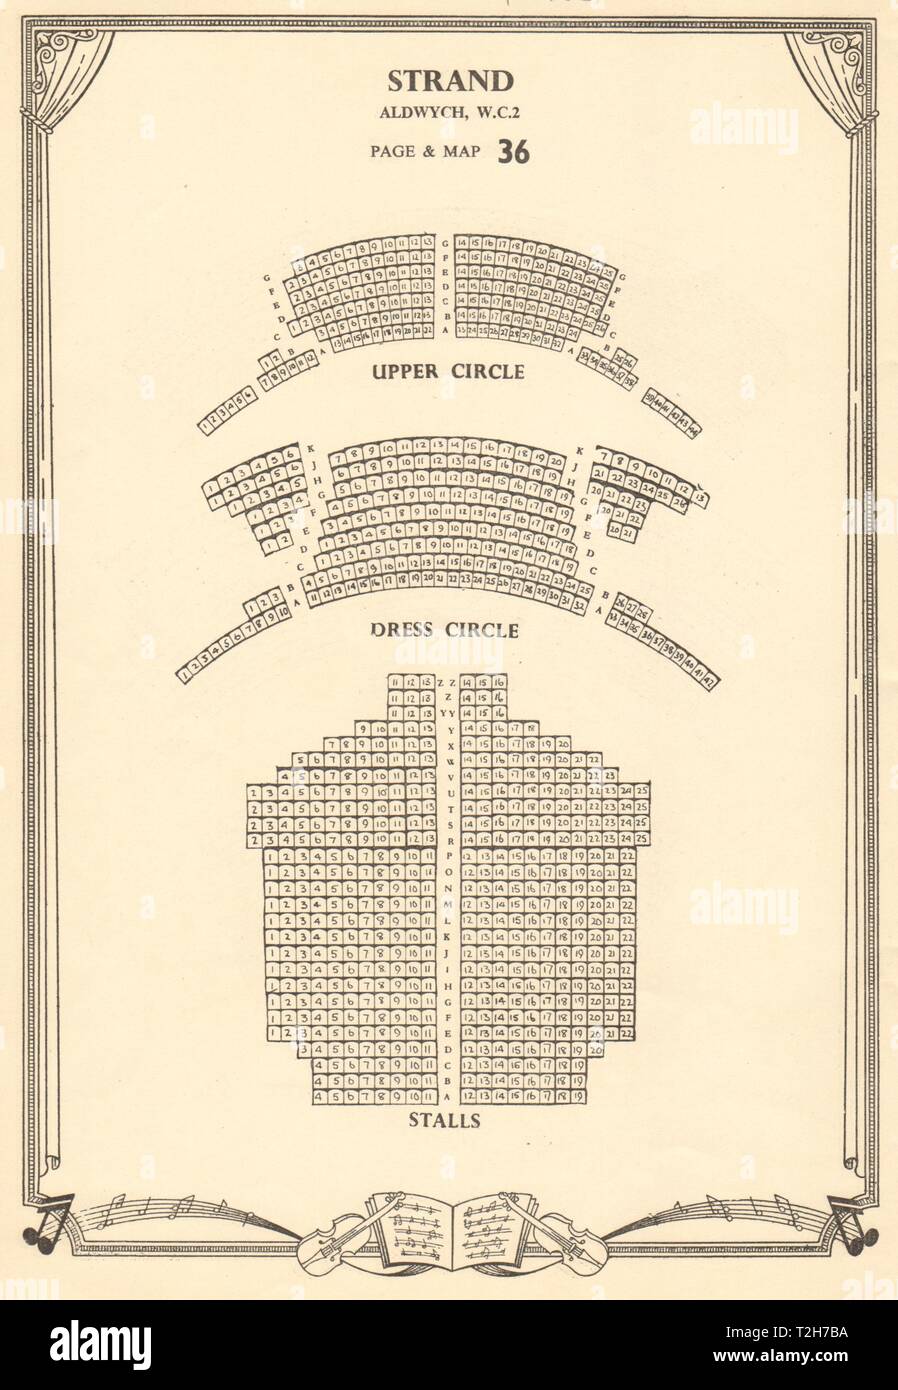 Aldwych Theatre Seating Chart